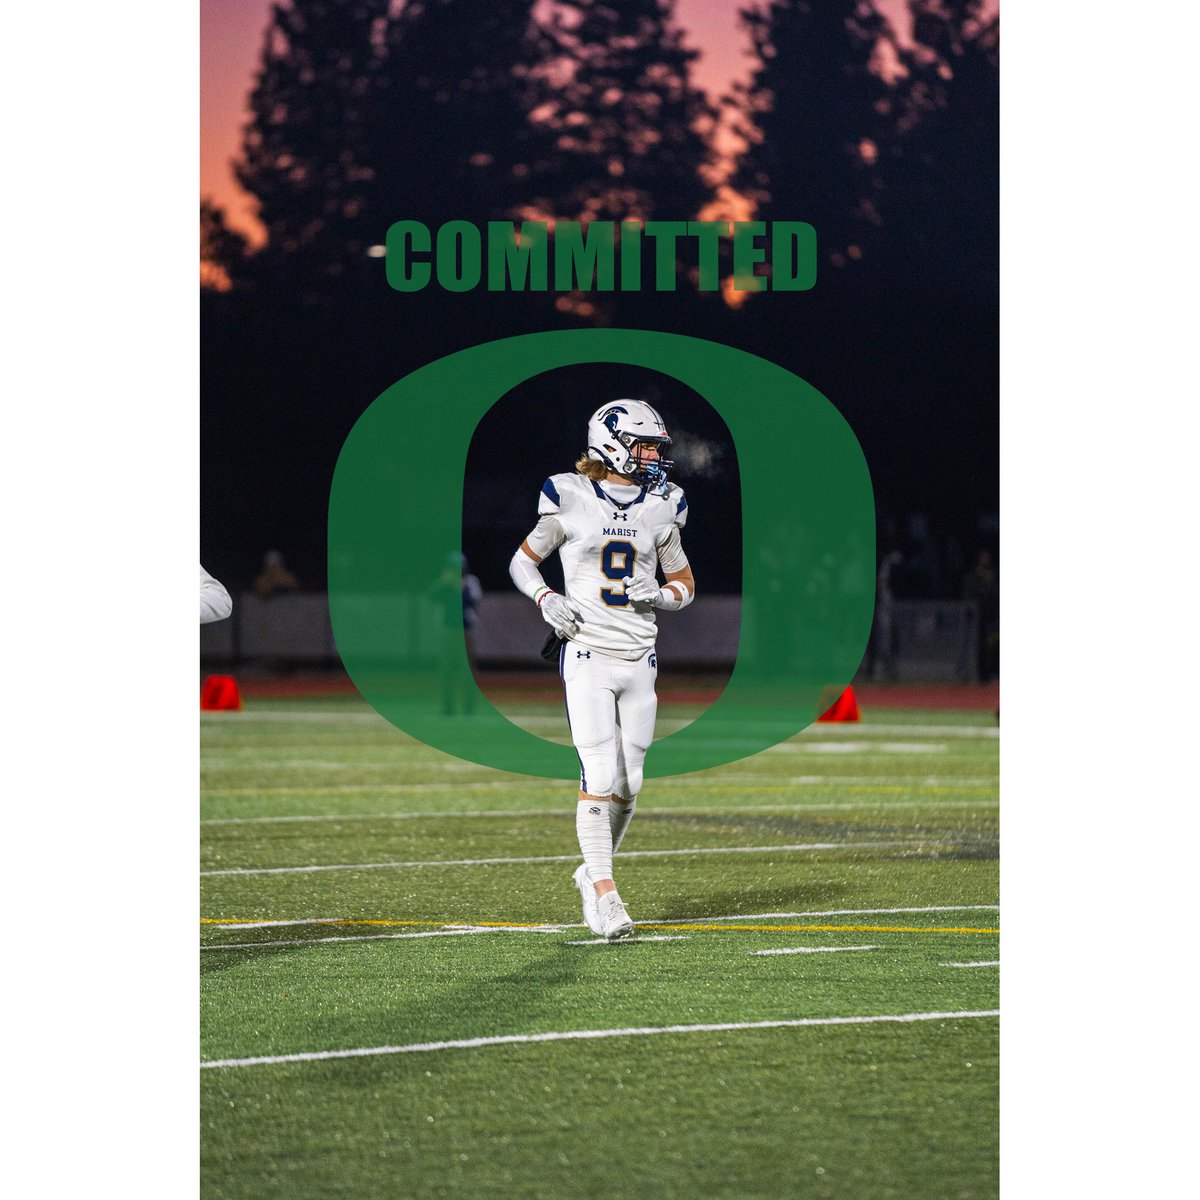 Incredibly blessed to announce my commitment to continue my athletic career at the University of Oregon Jeremiah 29:11 @oregonfootball